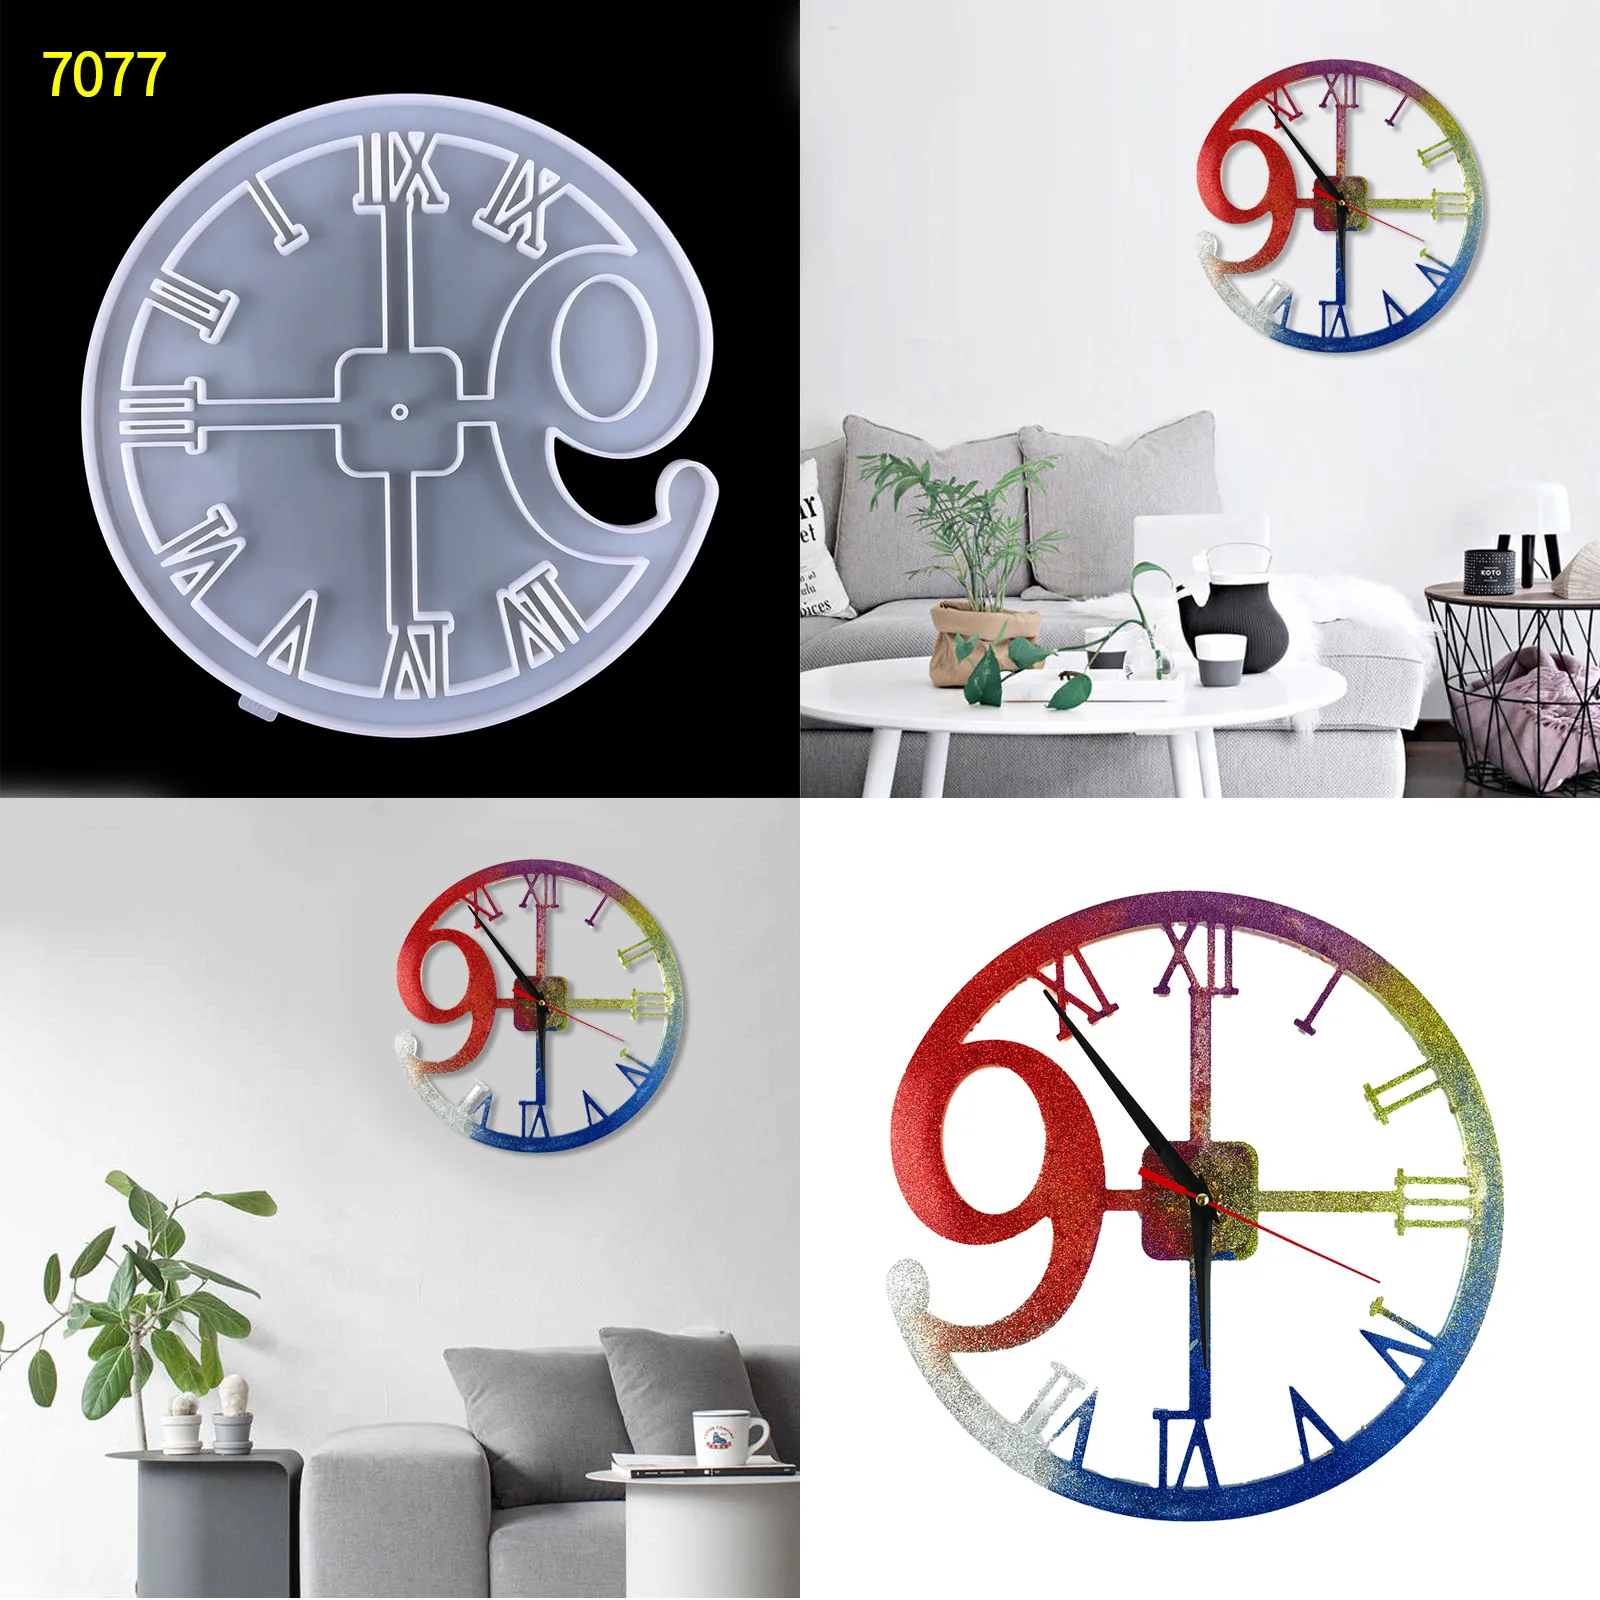 Clock Wall Hanging Silicone Mold DIY Round Hollow Digital Clock Pendant Wall Decoration Clock Silicone Mould For Resin Making crystal epoxy mirror surface roman arabic numerals size clock watch silicone mold diy making jewelry decoration materials